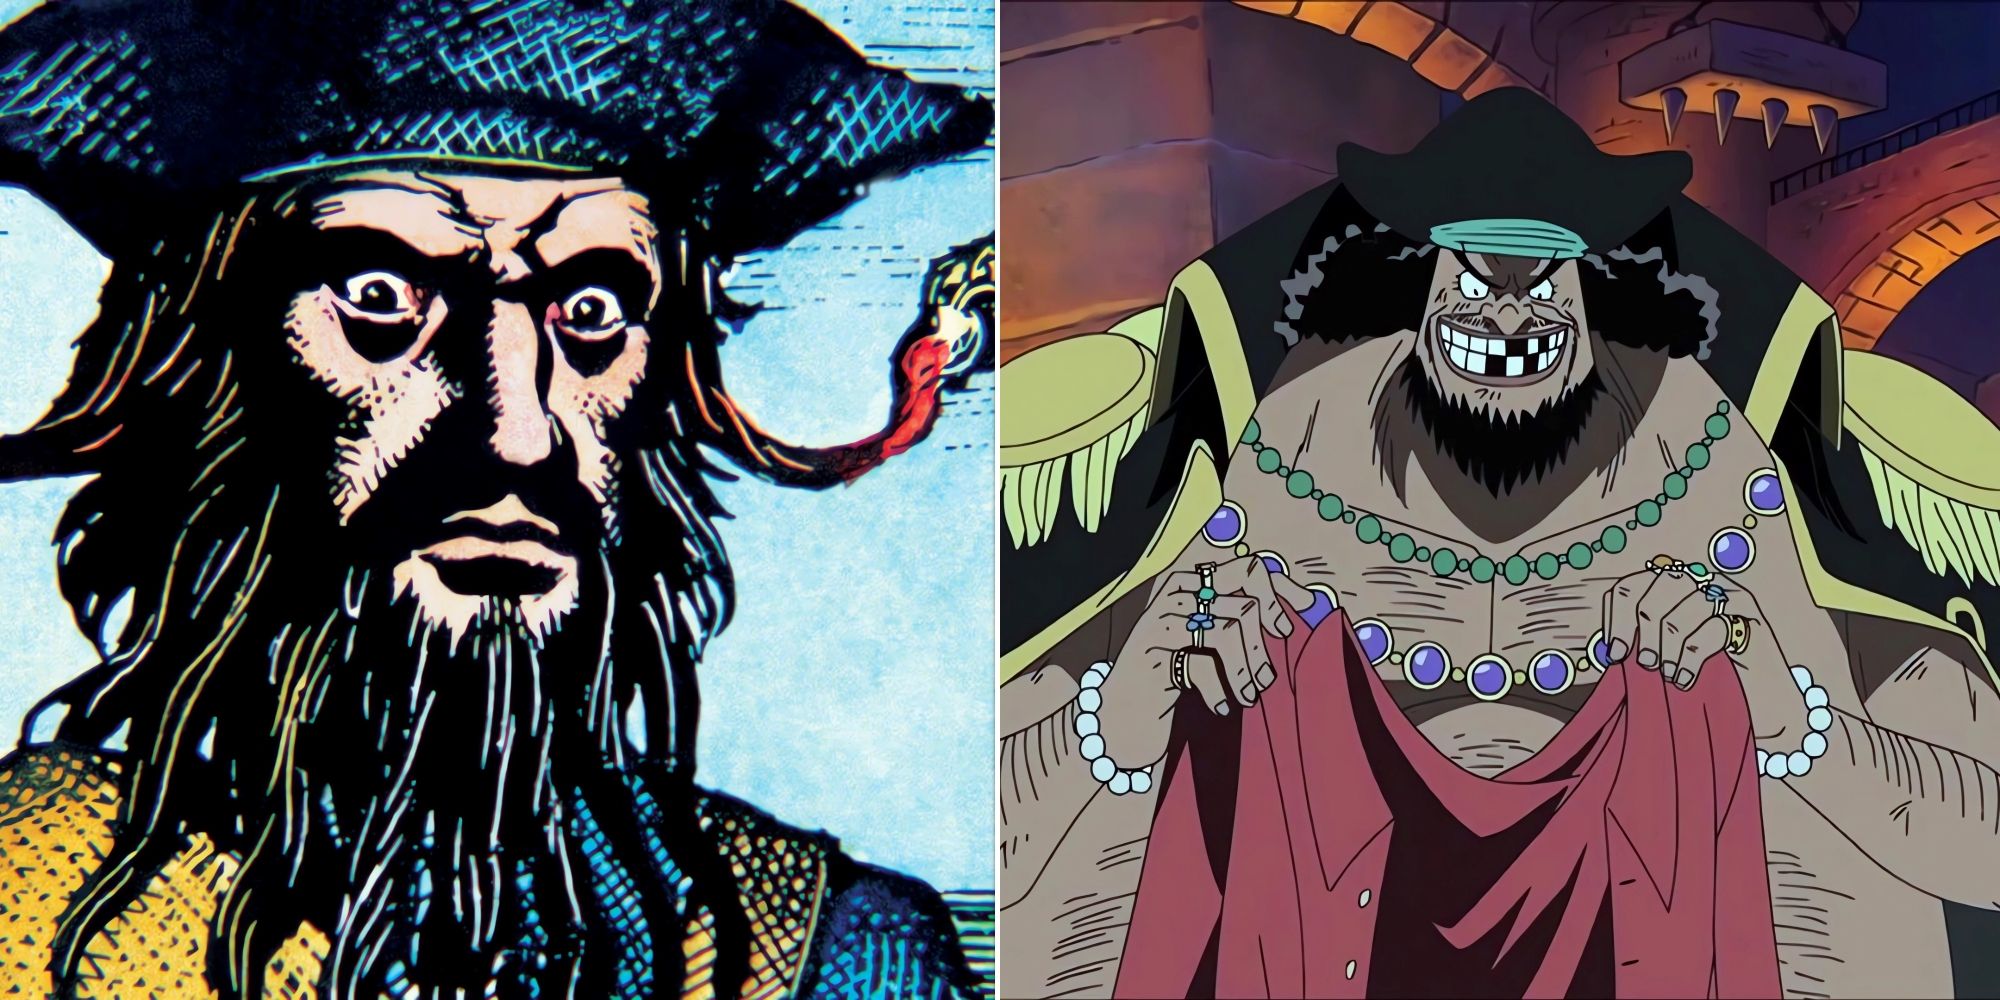 Collage Blackbeard the pirate and Blackbeard from the One Piece anime